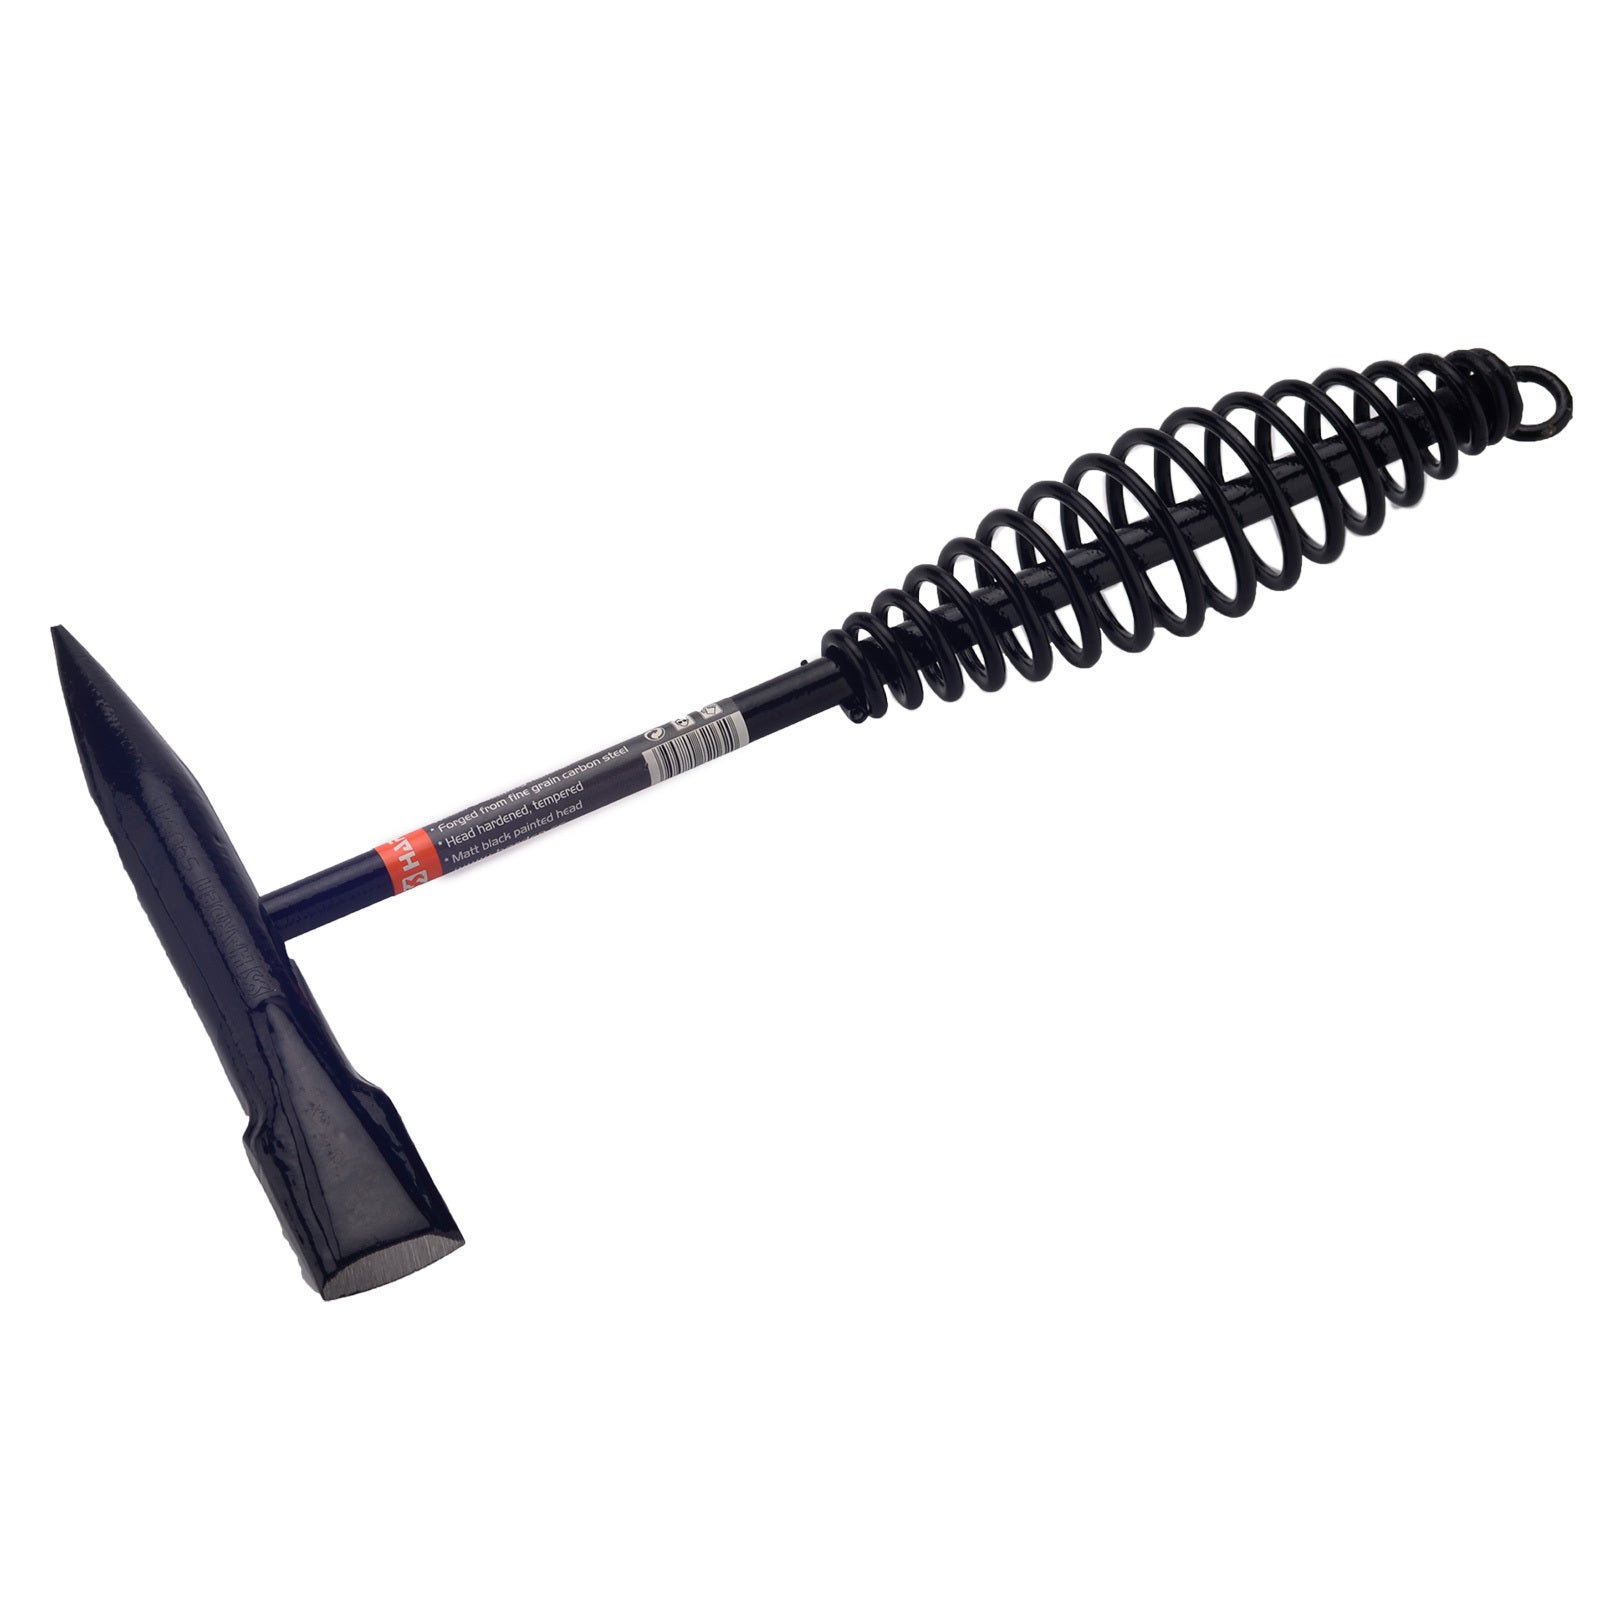 Harden 150mm Chipping Hammer 590541- BUY ONE GET ONE FREE